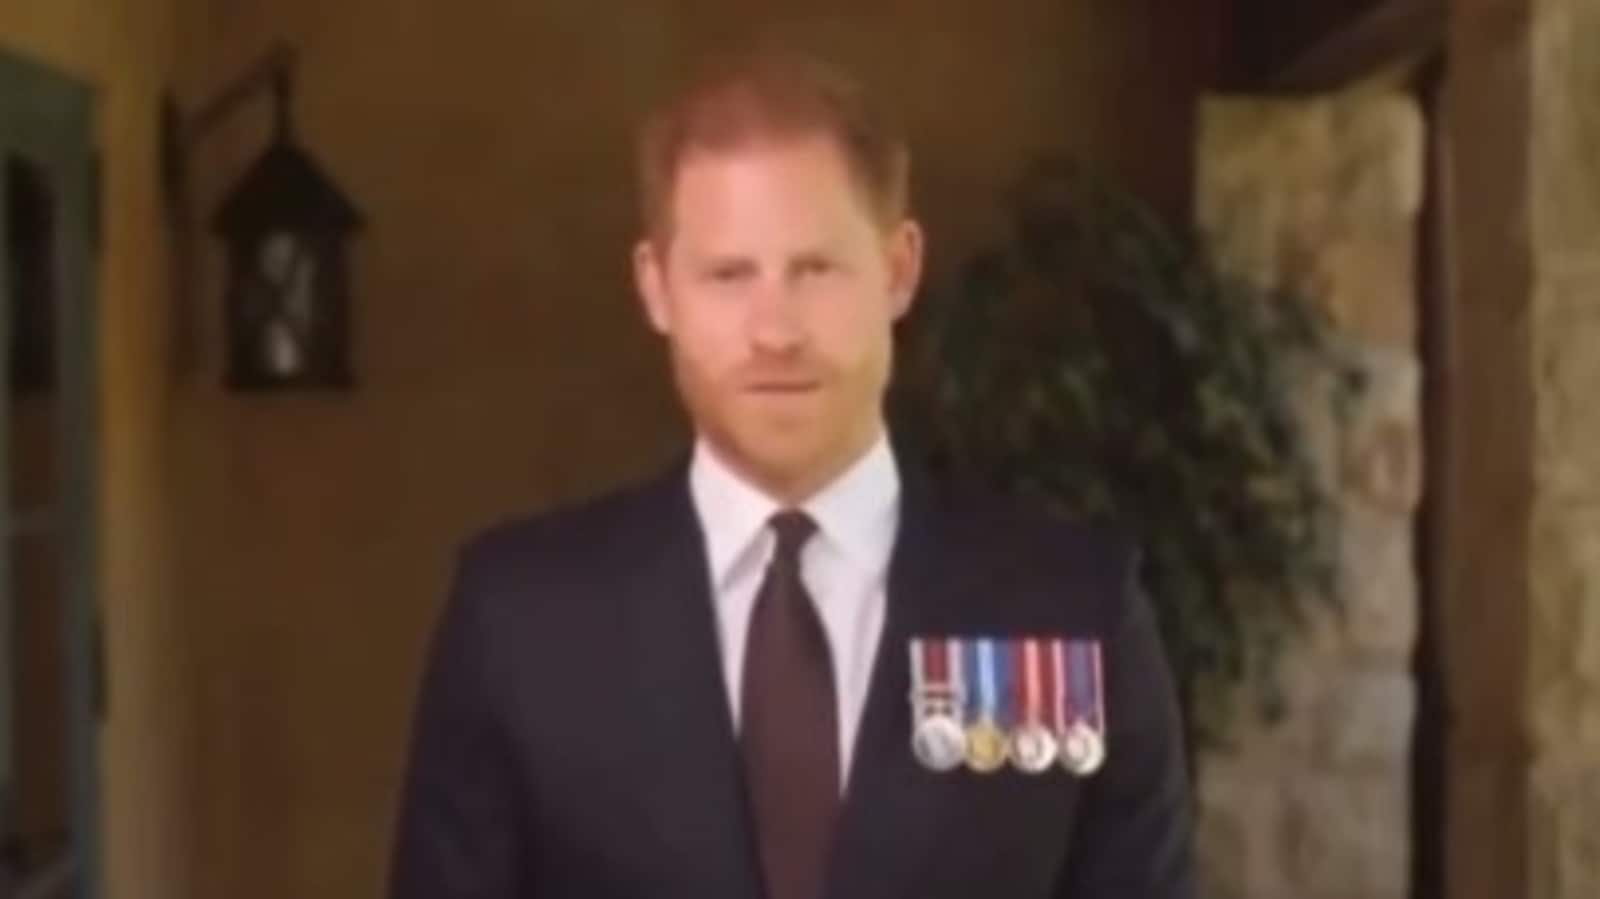 'Ridiculous': Prince Harry under fire for donning four medals while honouring US servicewoman